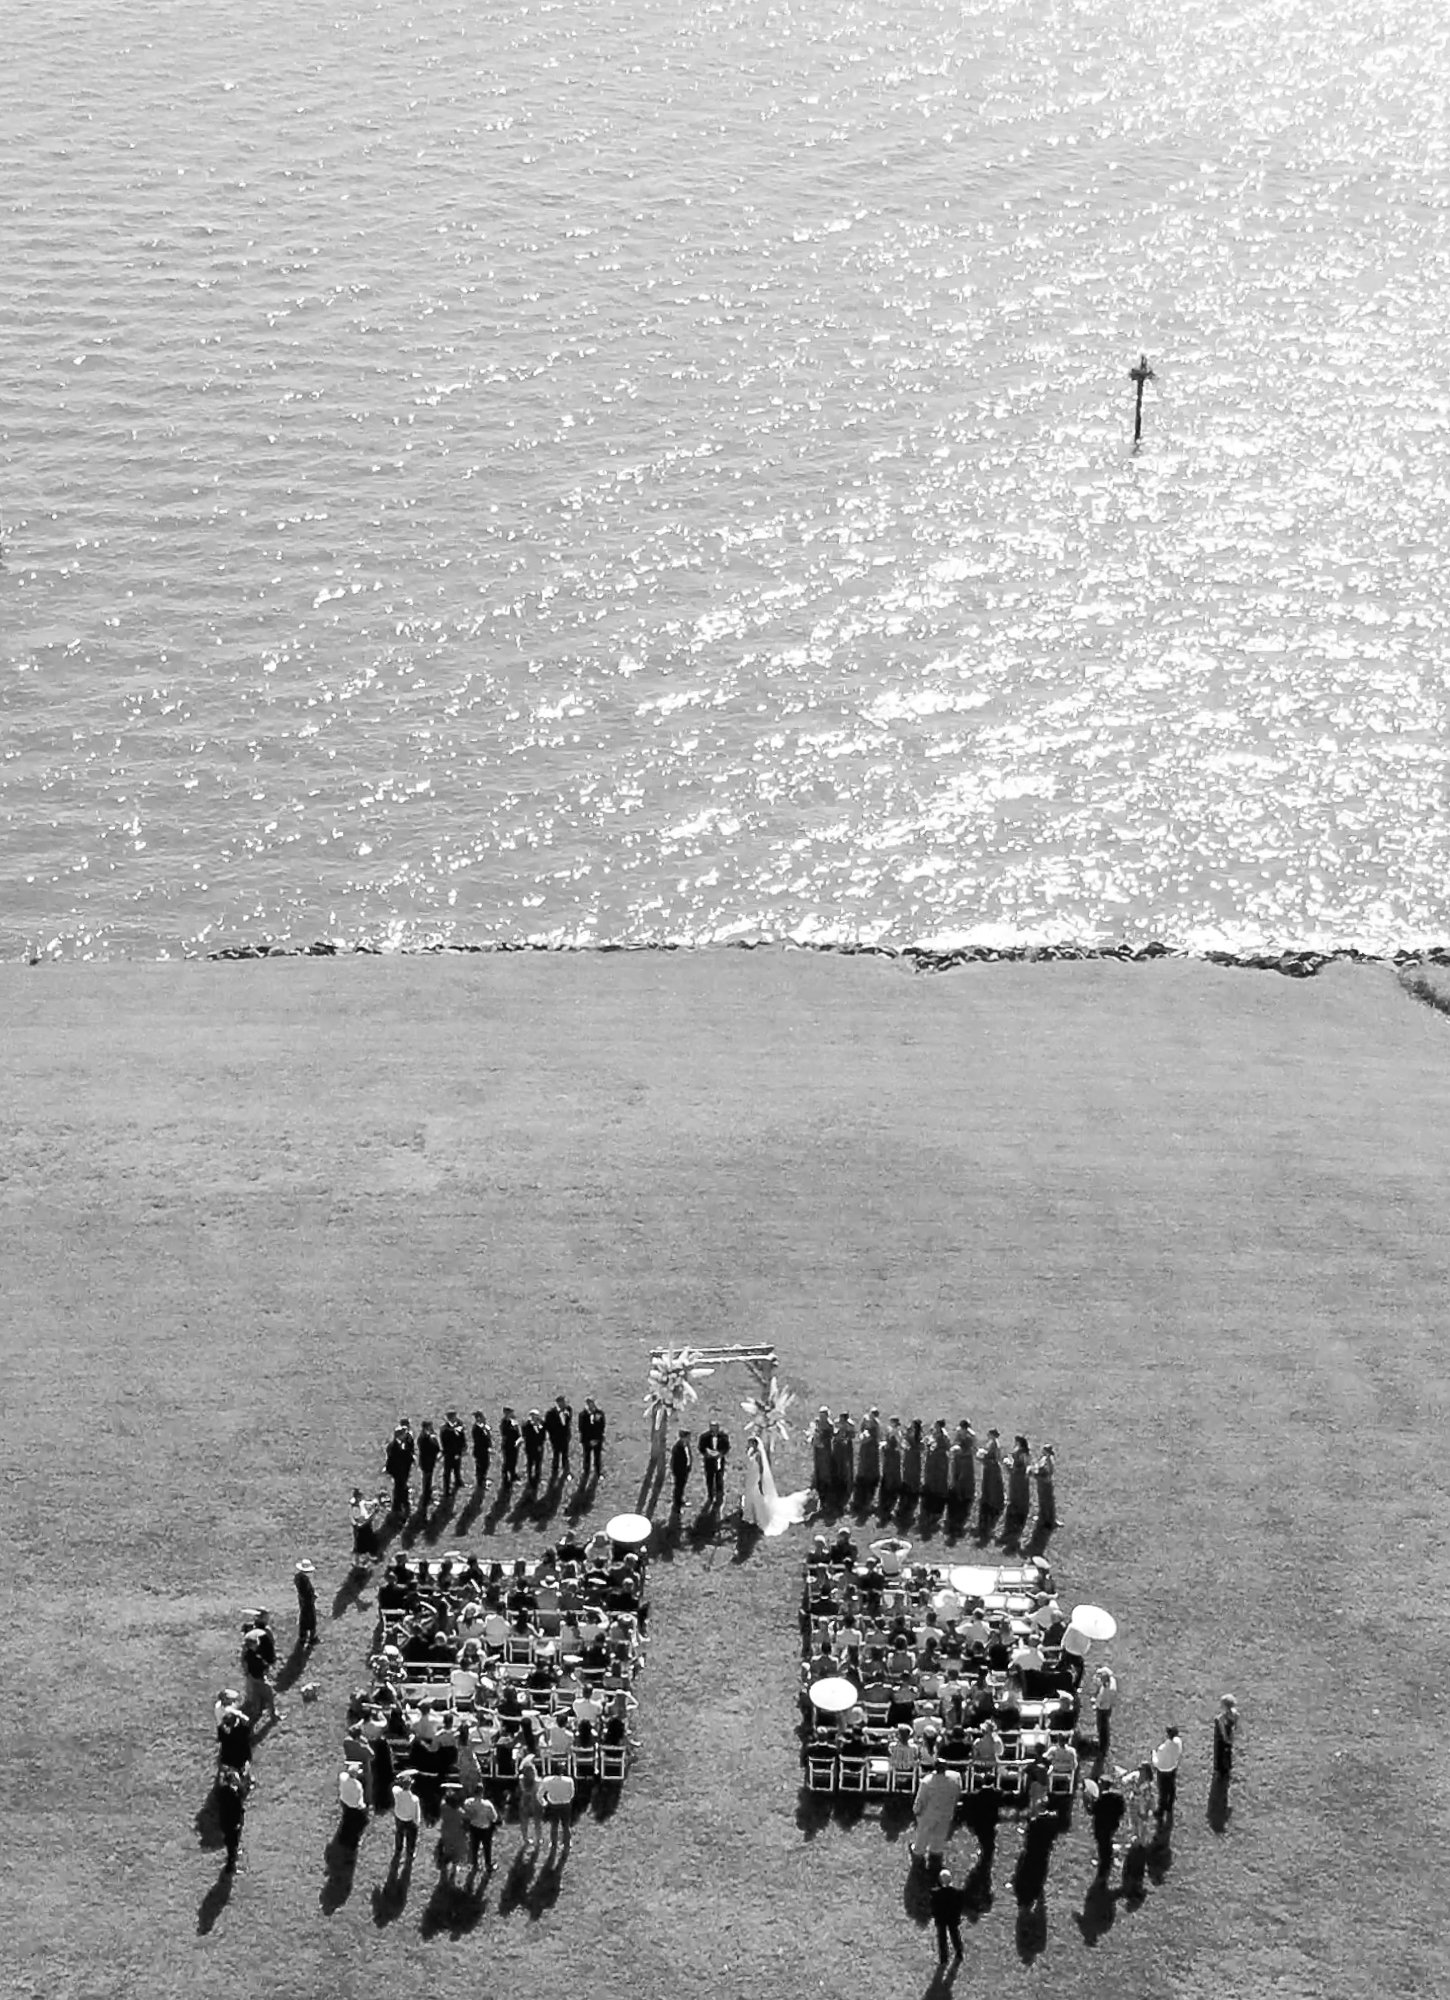 Wedding Ceremony drone shot at the weatherly pavillion on the water in maryland